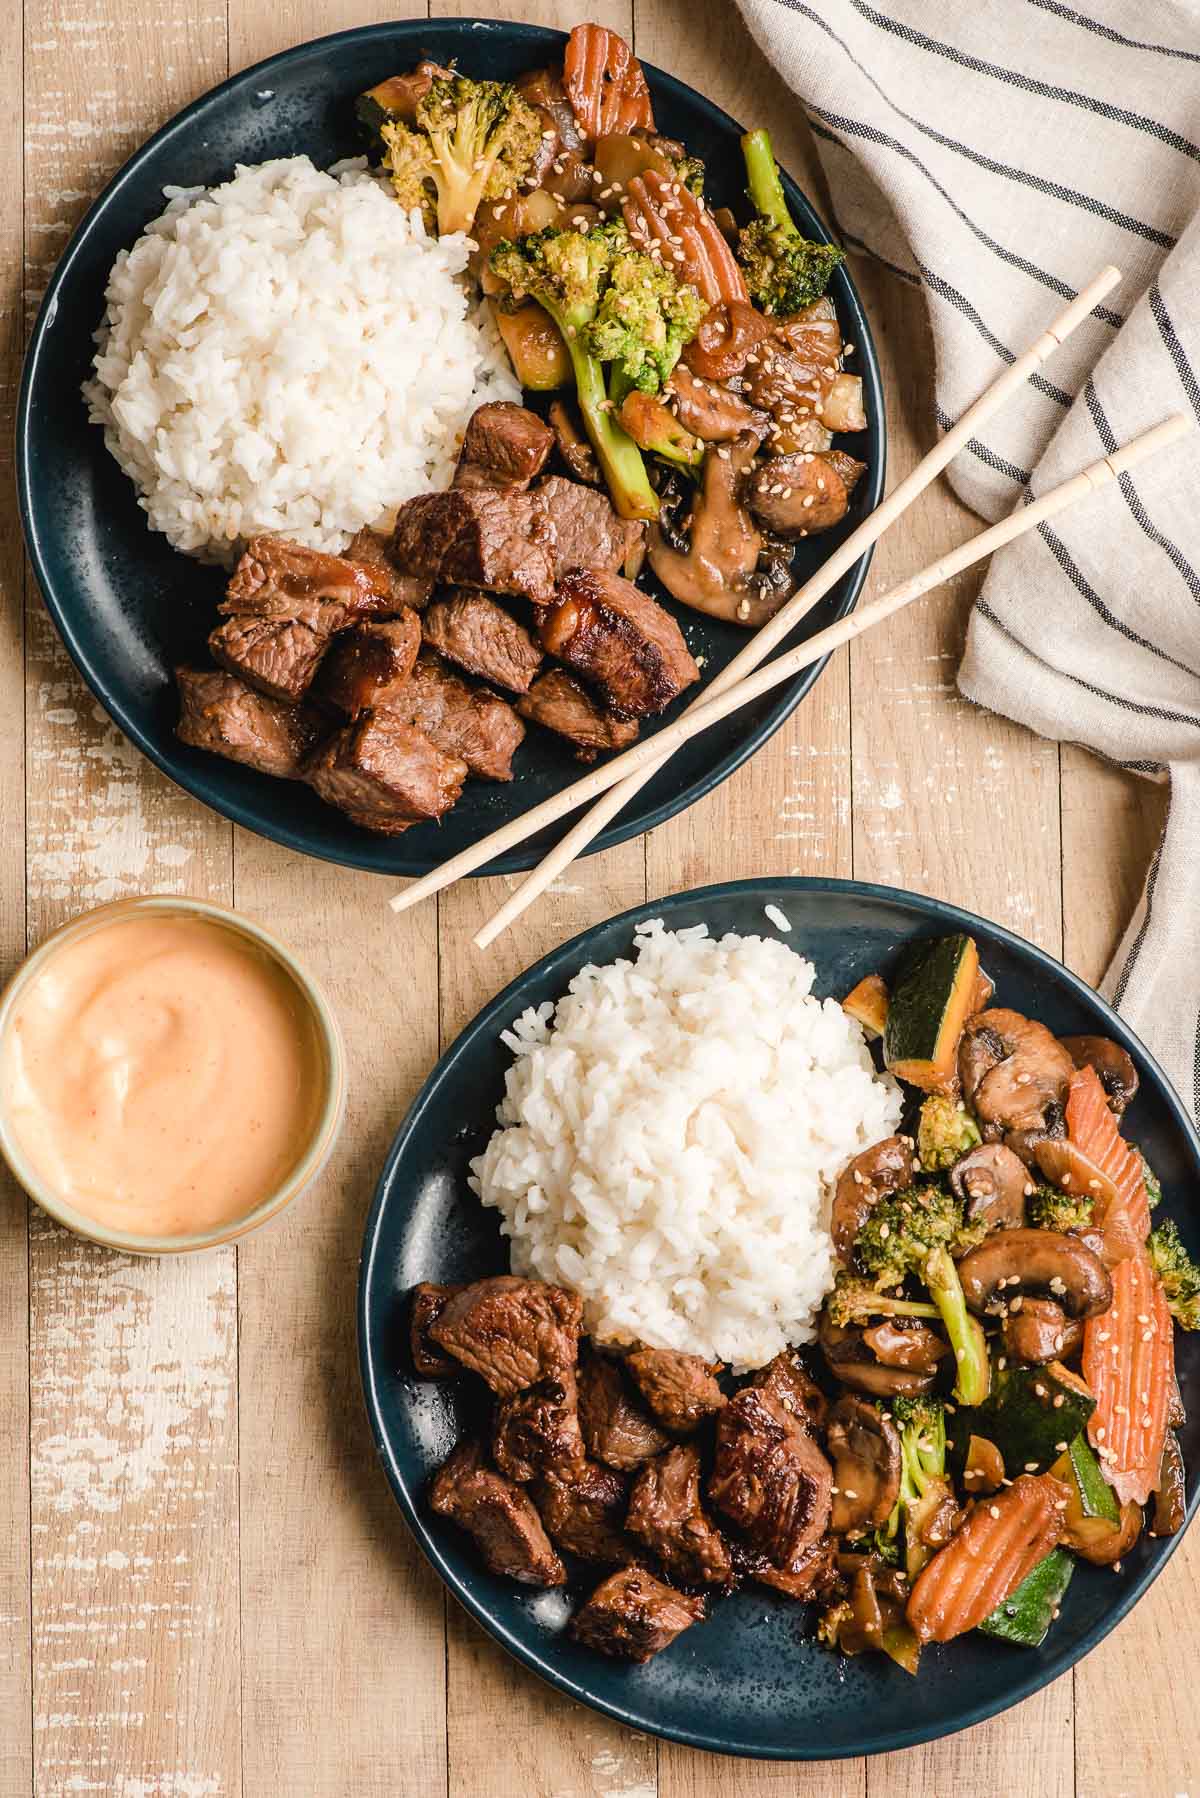 Two blue plates, each with Japanese Steakhouse steak bites, white rice, and hibachi veggies, plus a bowl with yum yum sauce.